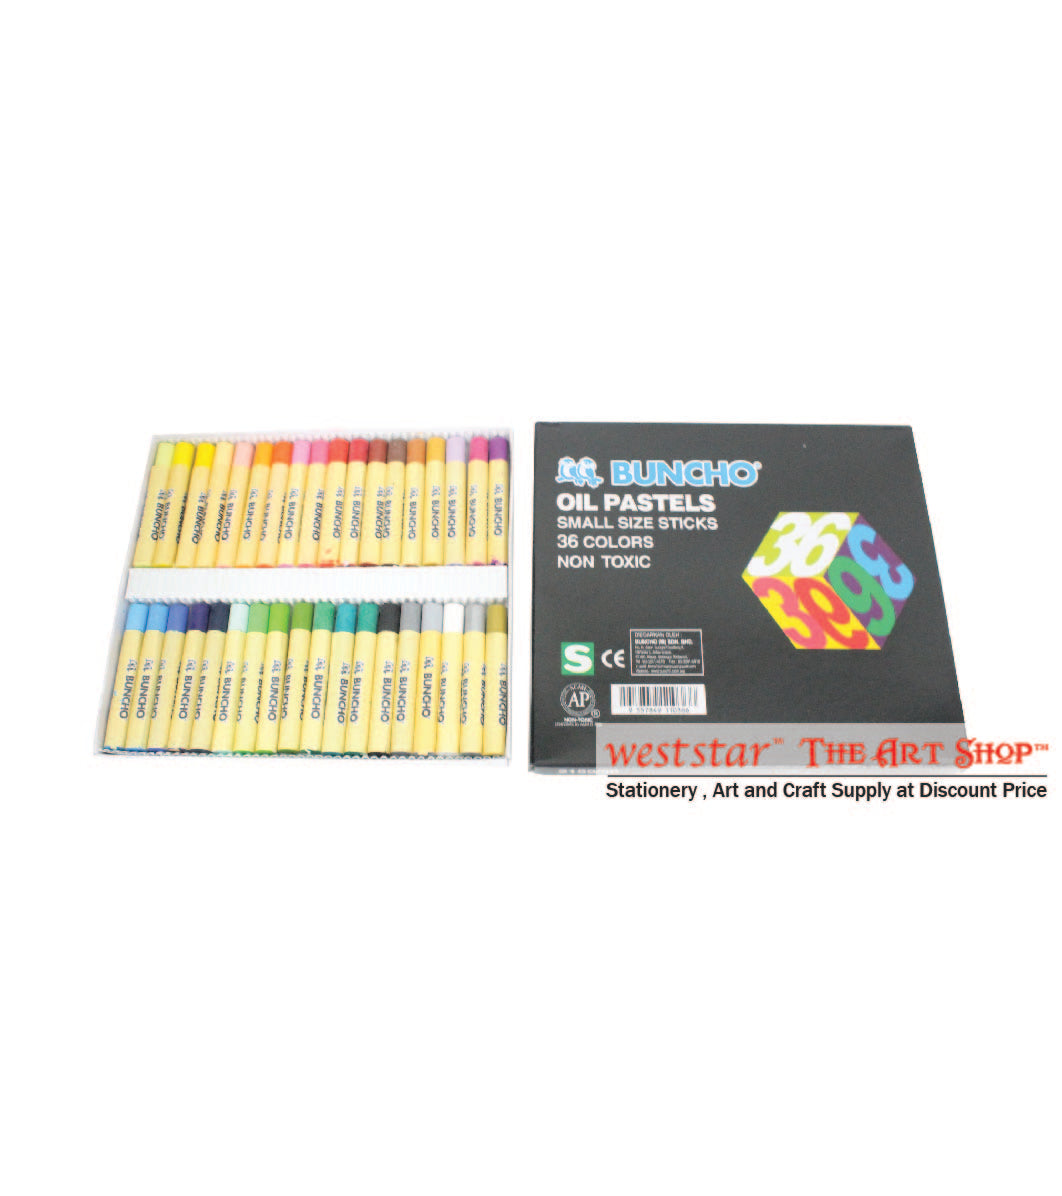 Buncho Oil Pastel Small Size Stick - Black Box - Non-Toxic Crayon Kids Art Craft Drawing Colouring